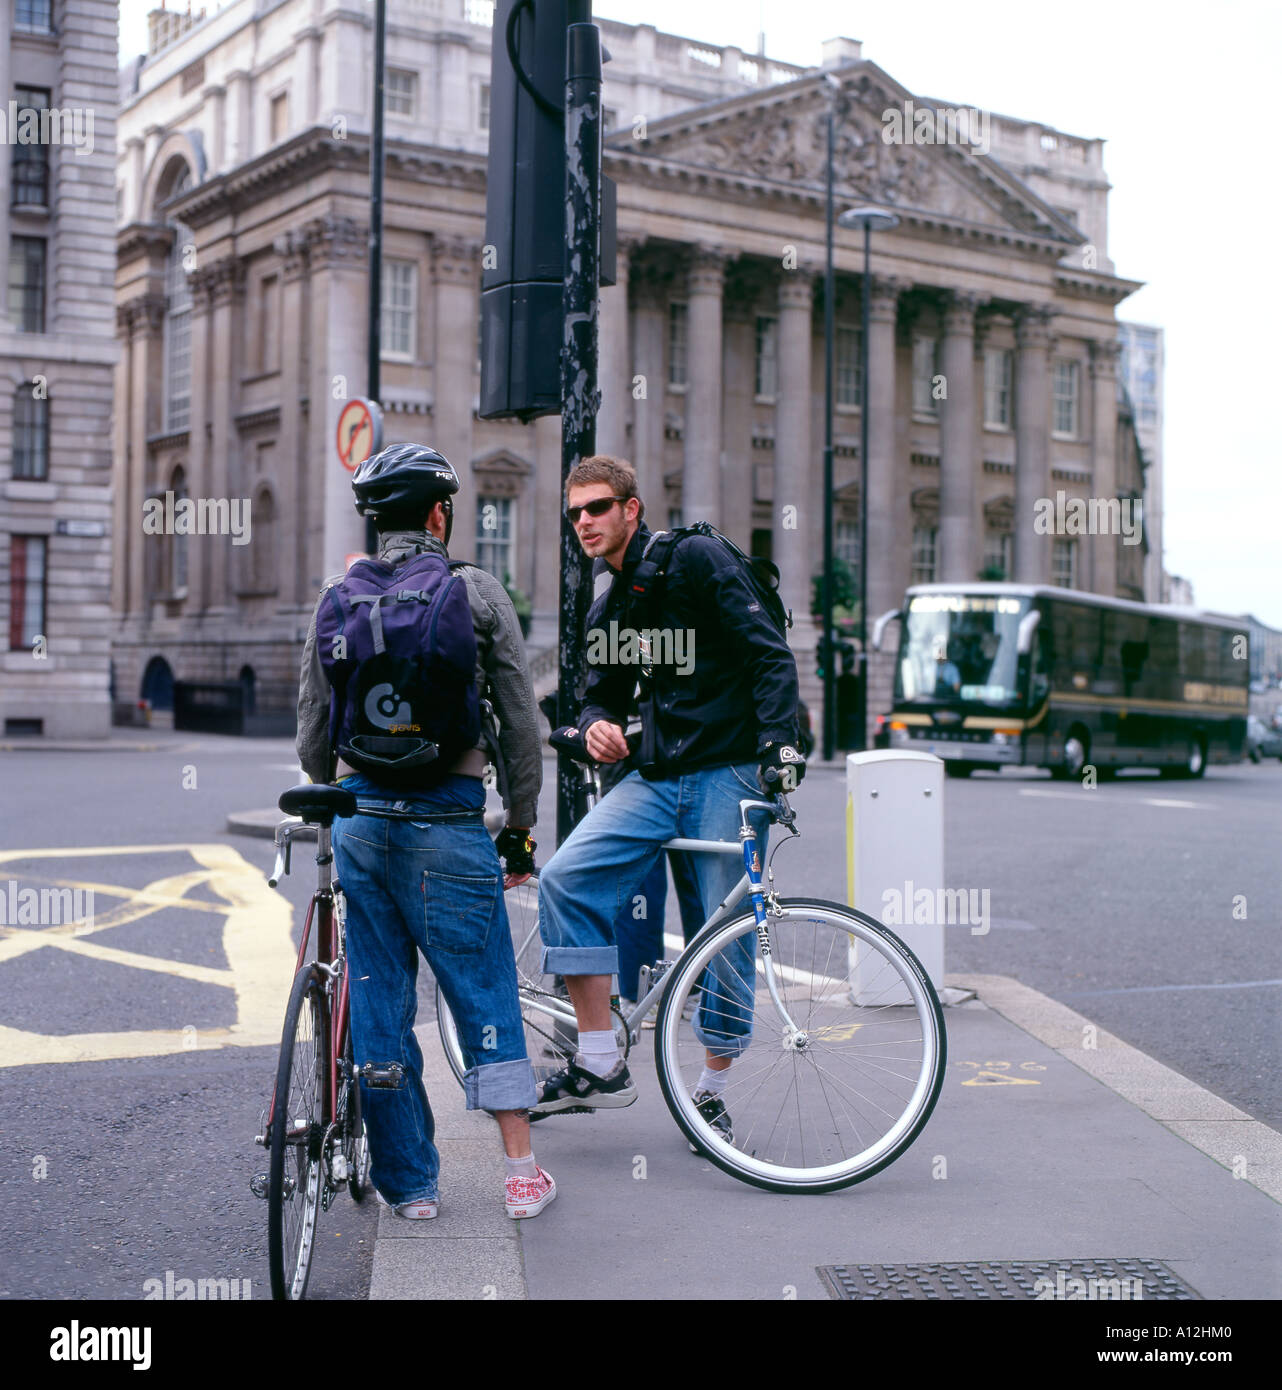 Two male cyclists in conversation with Mansion House in the background London Square Mile, England Stock Photo